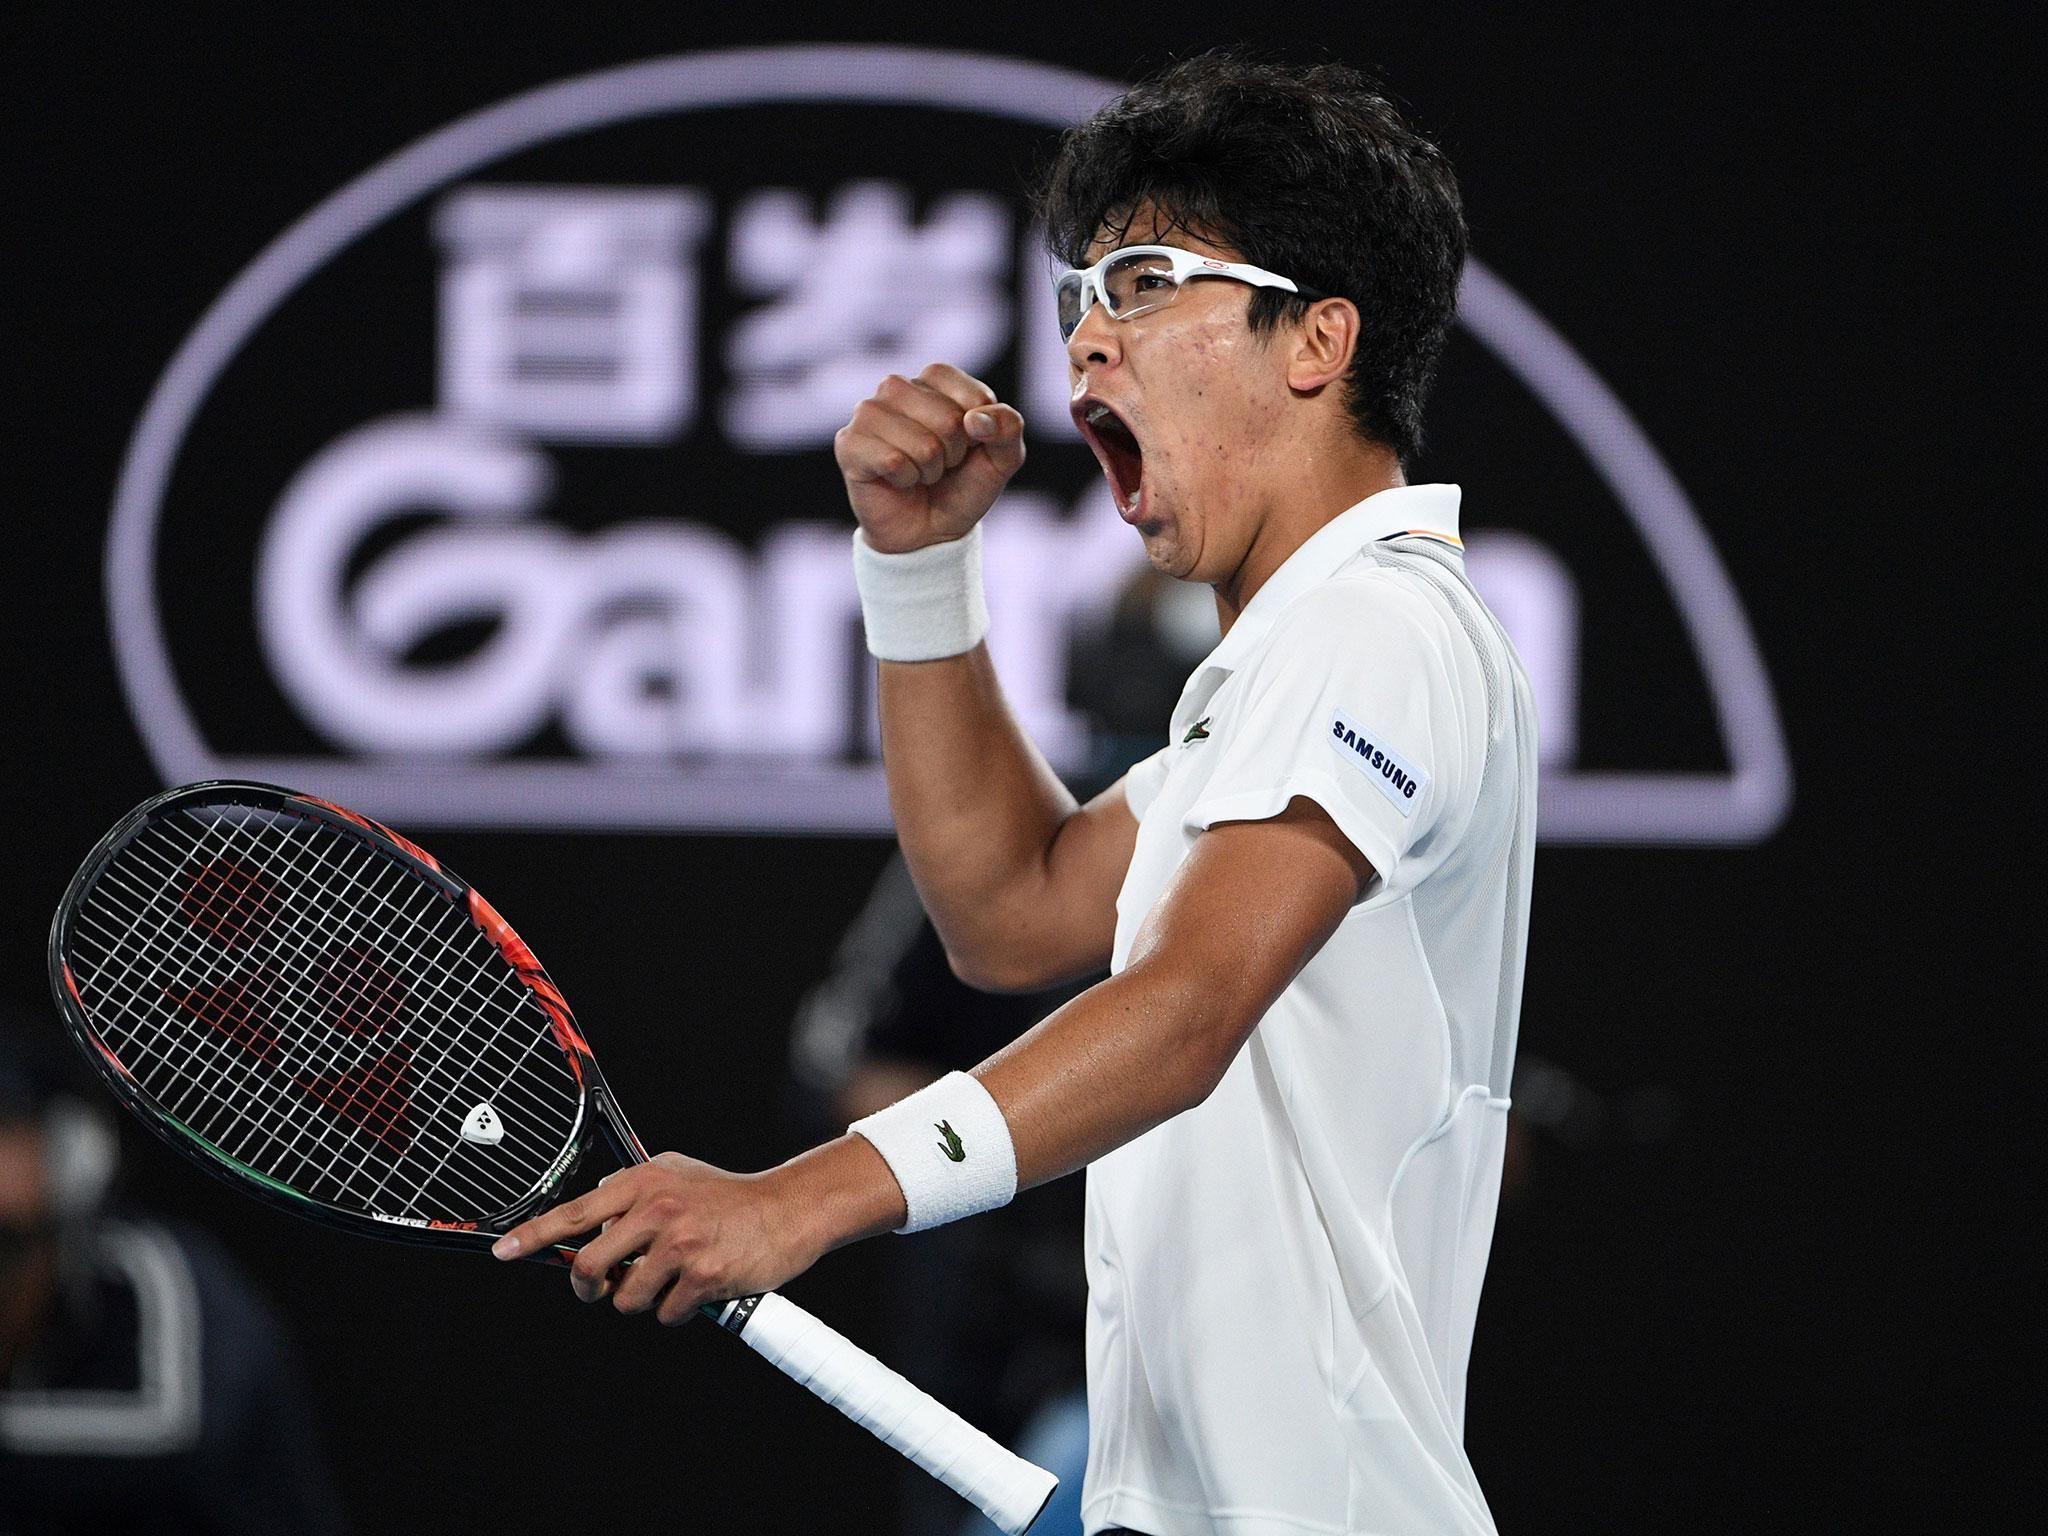 Hyeon Chung: The South Korean youngster looking to make it big